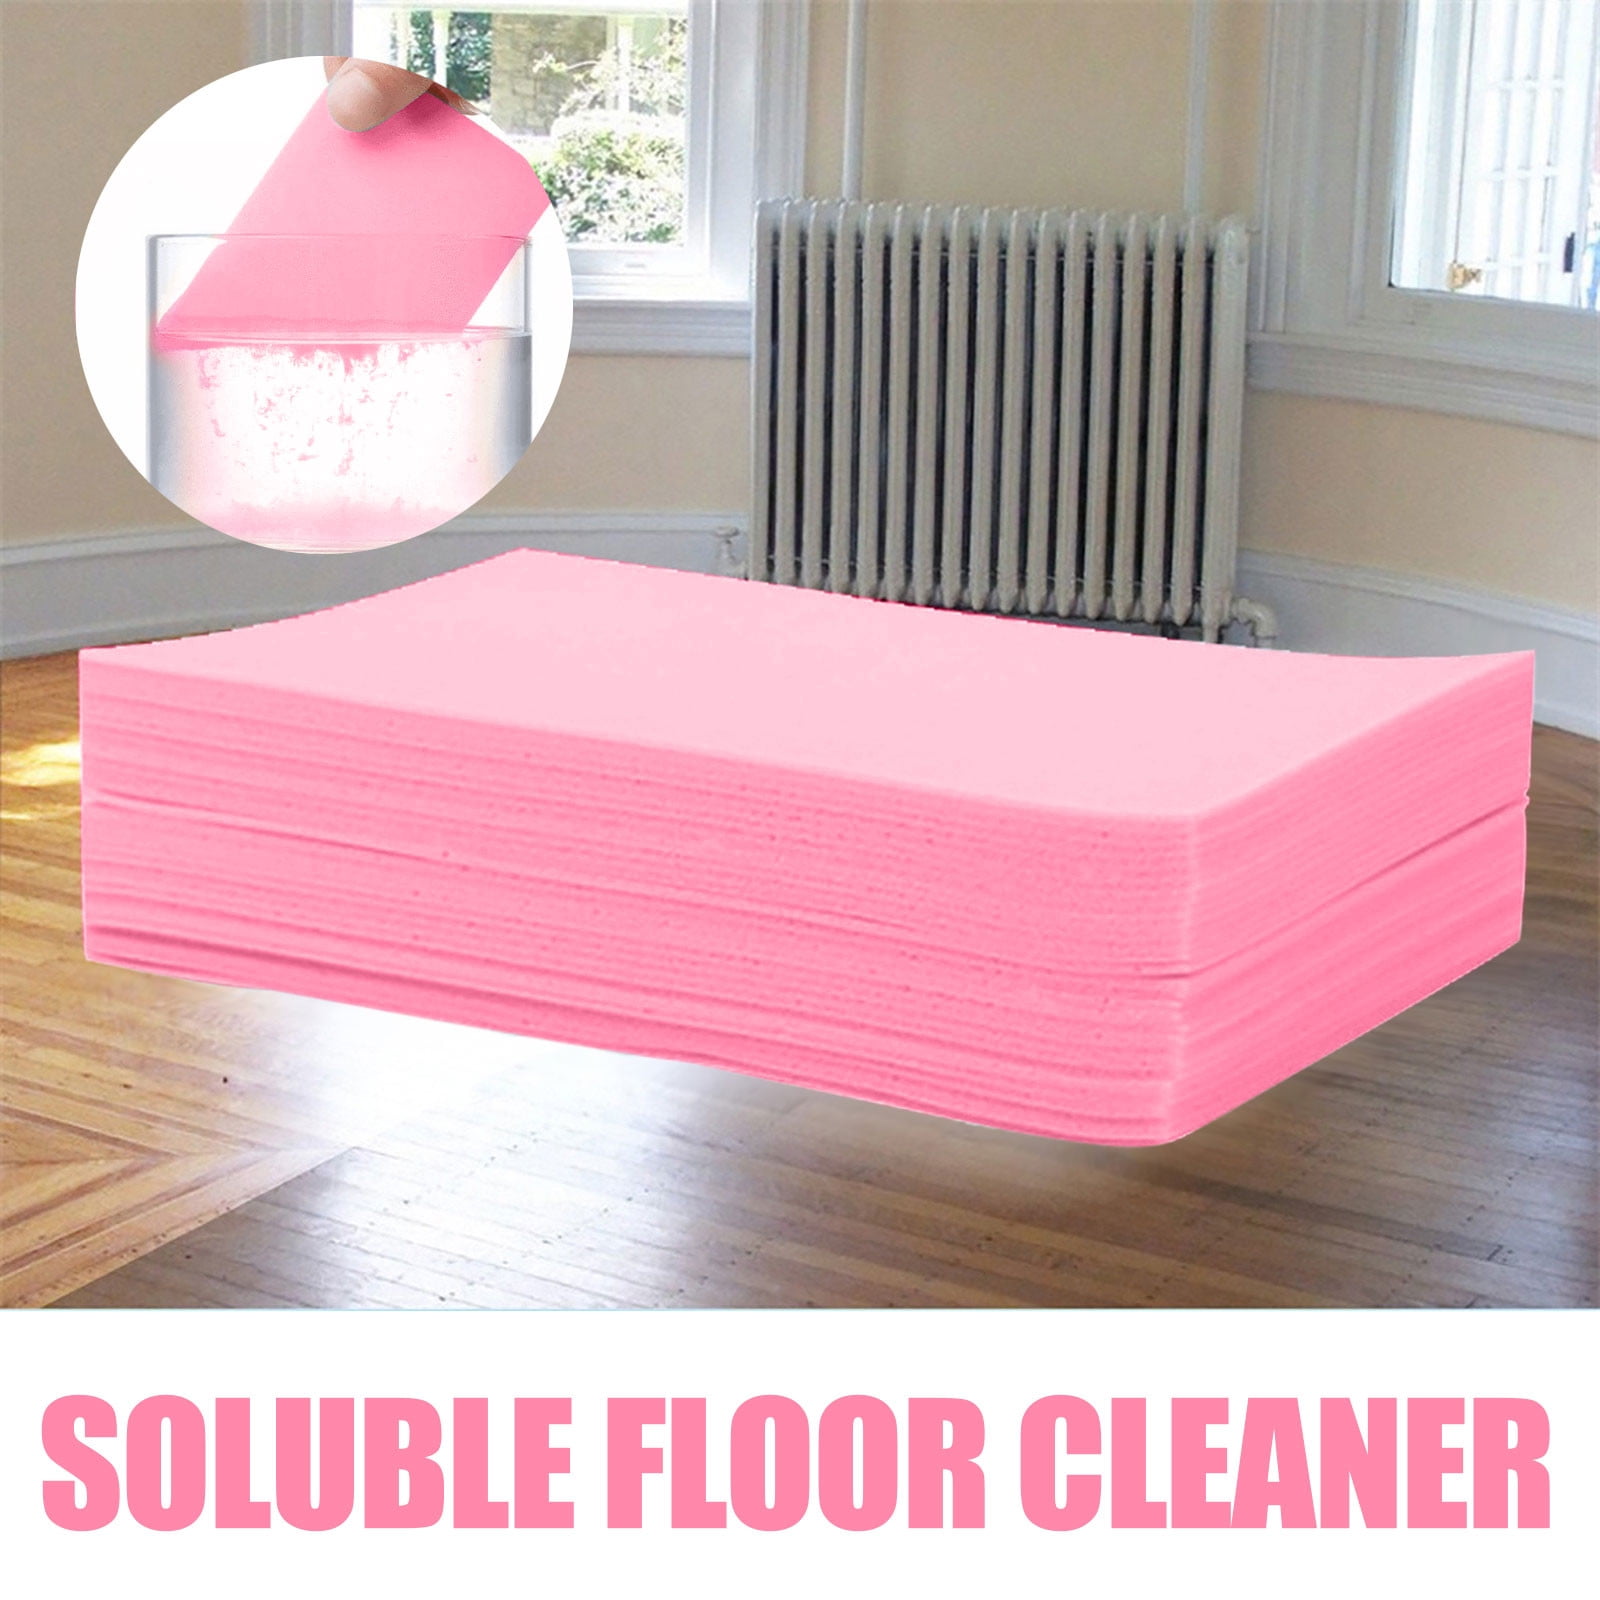 XMMSWDLA 30 Floor Cleaning Pads, Fragrant Disinfectant Cleaner